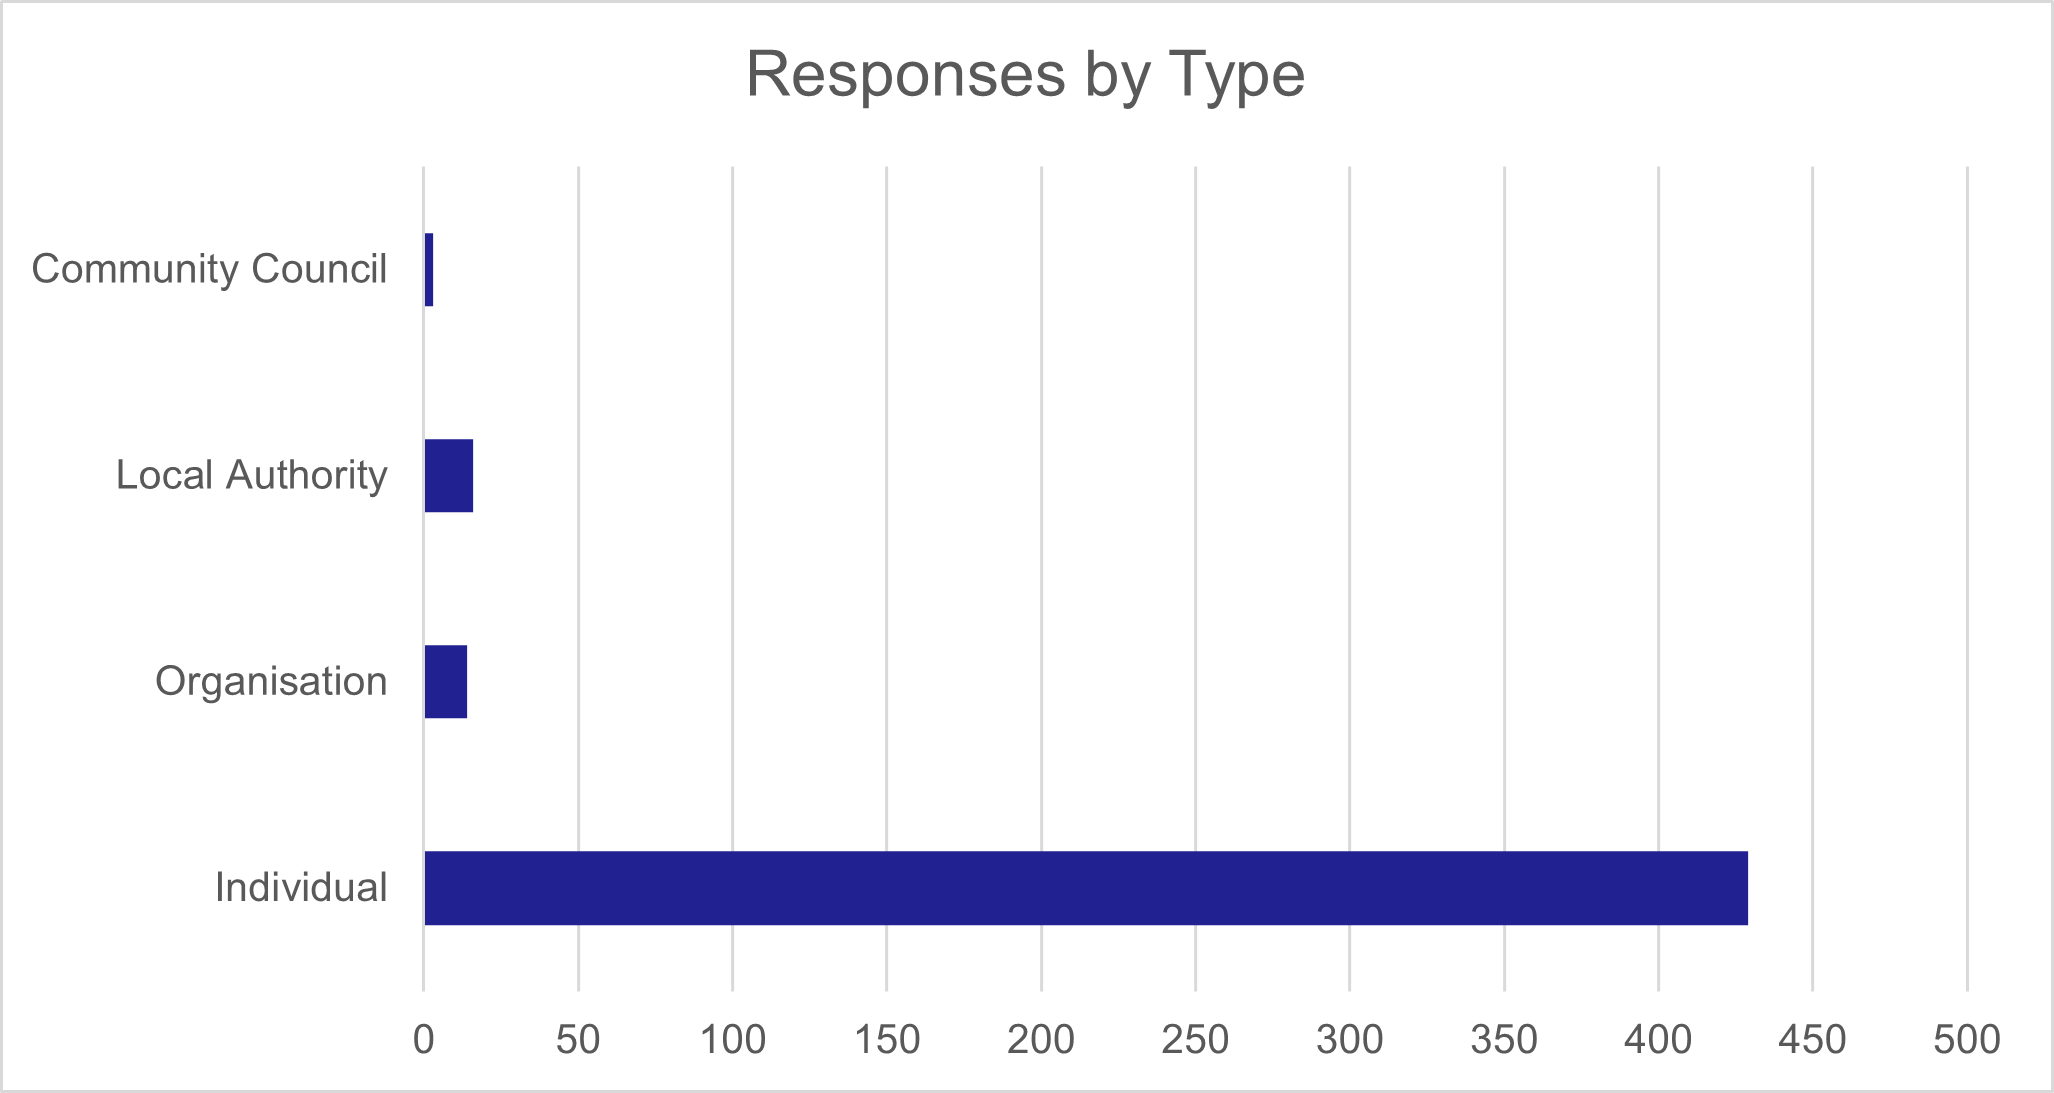 Responses by type, as described in text